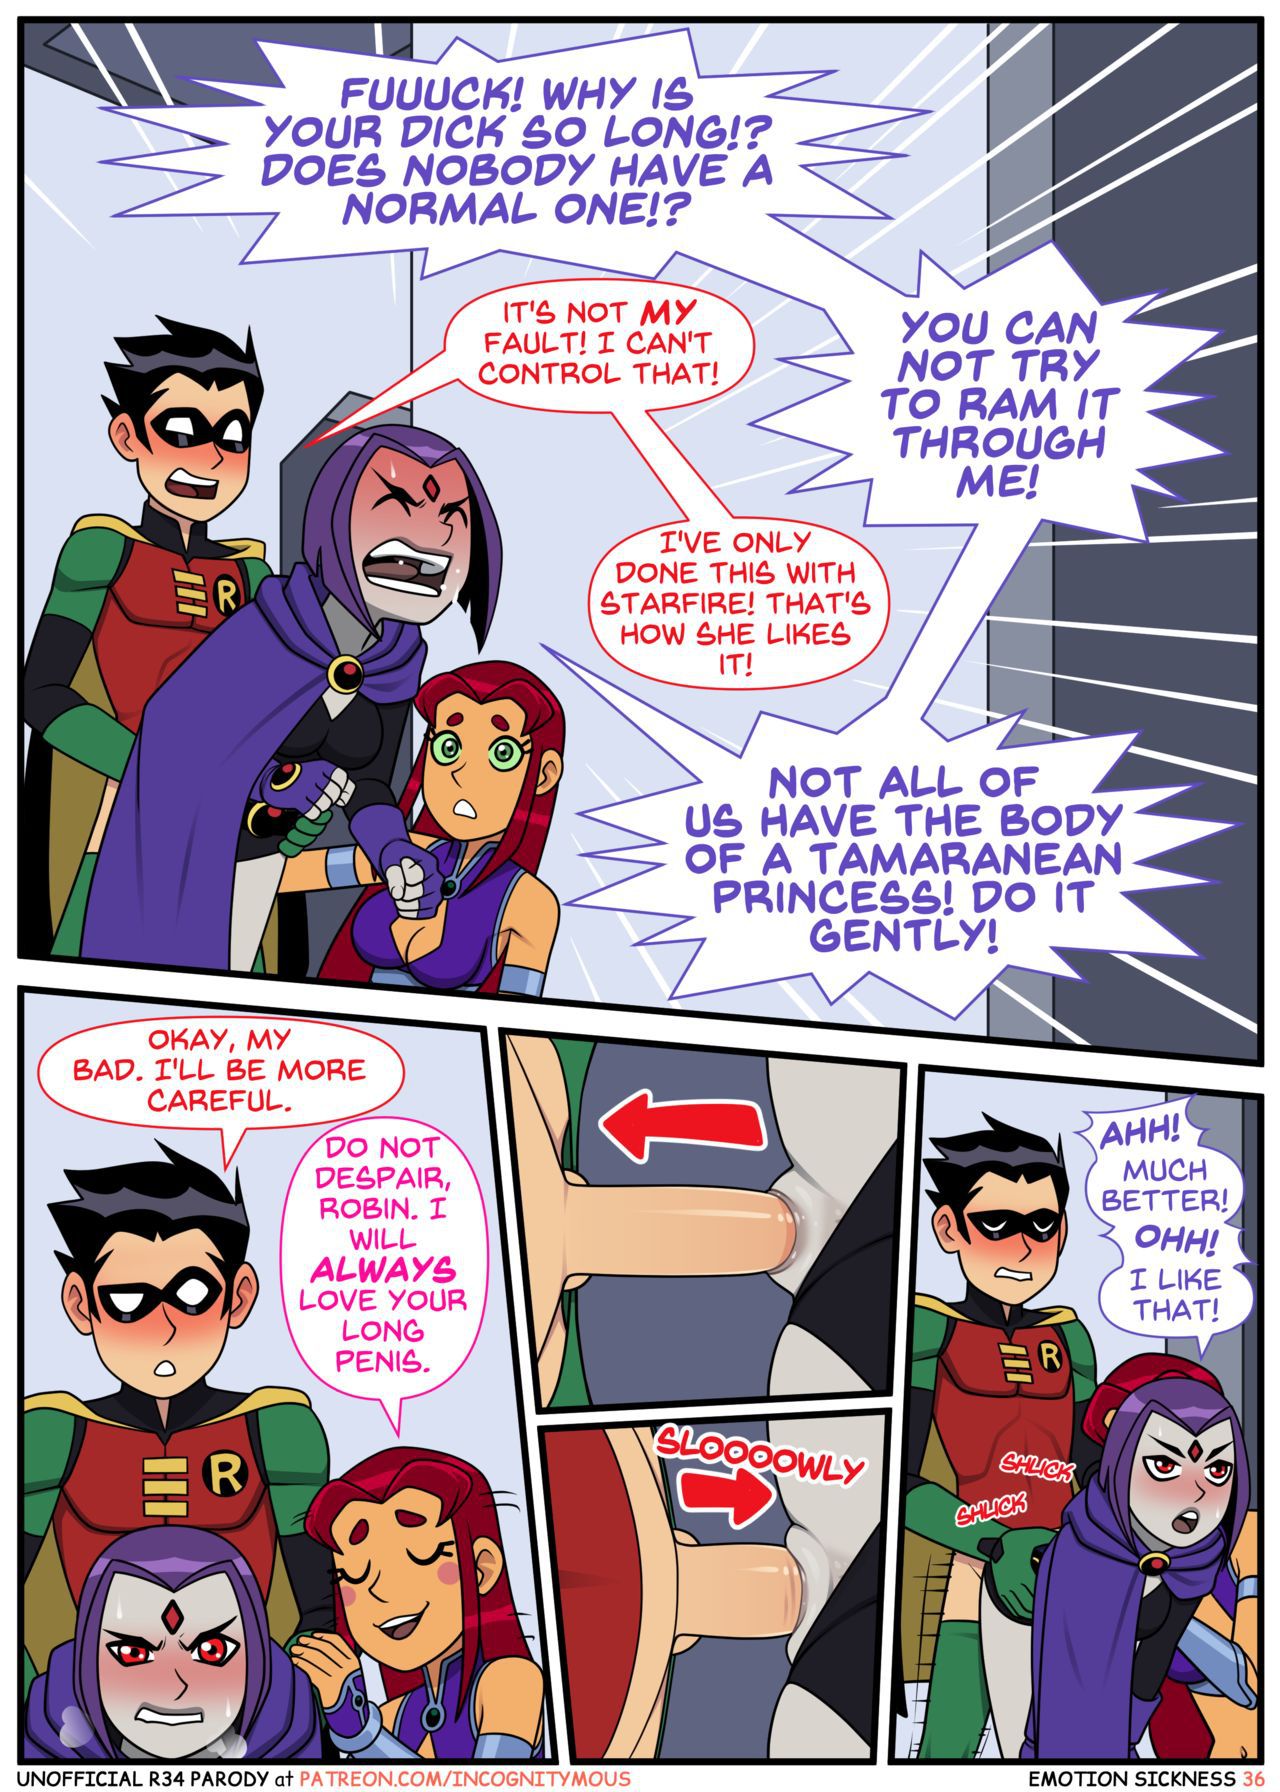 [Incognitymous] Emotion Sickness (Teen Titans) [Ongoing] 35